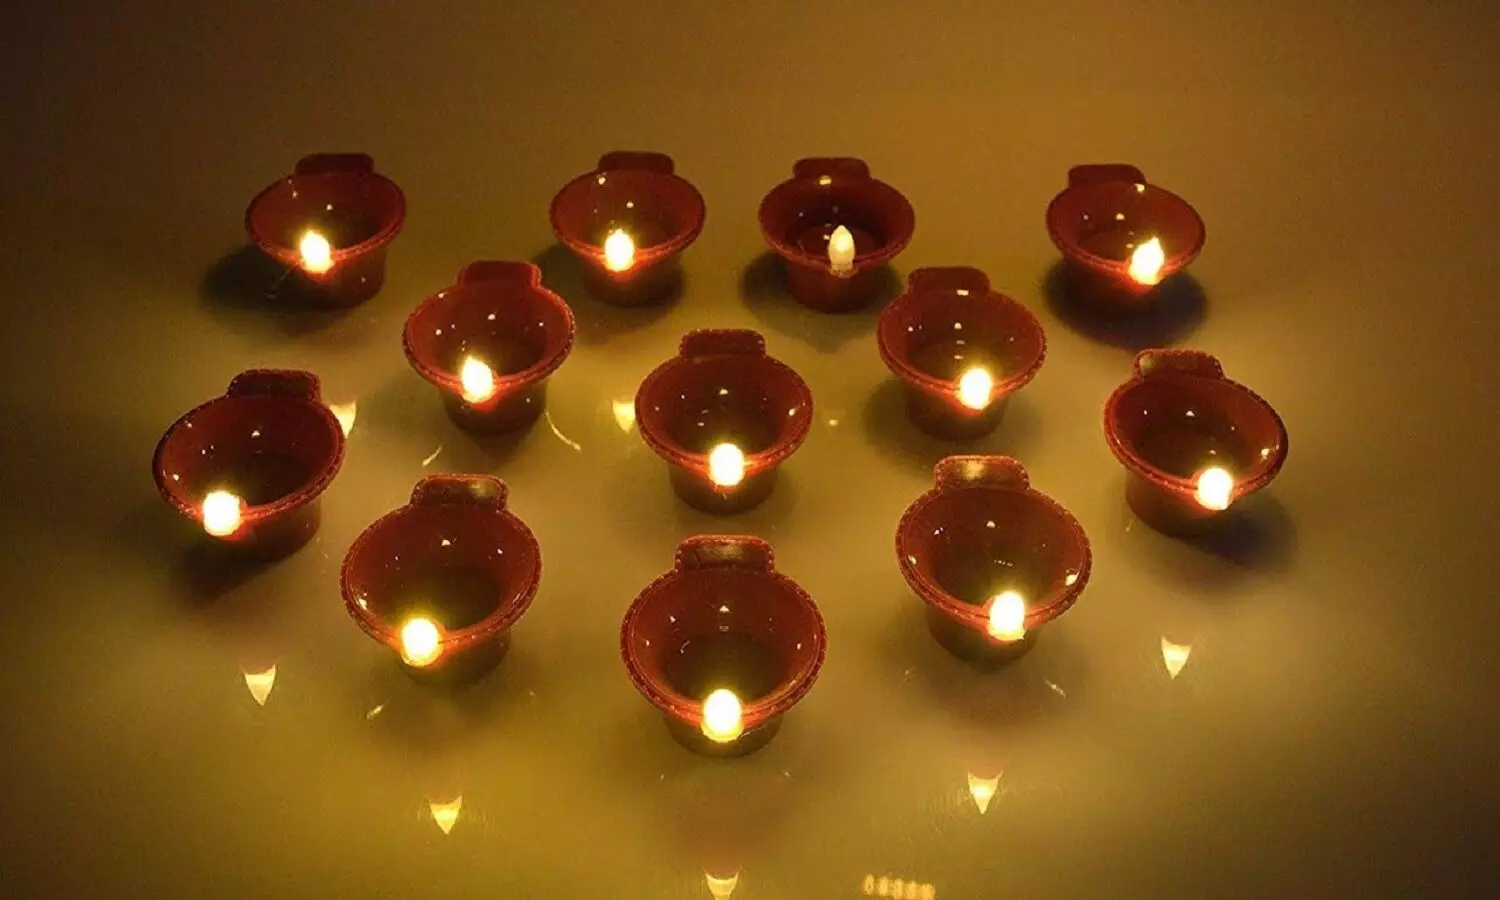 This time you will get to light a lamp with water in Deepawali